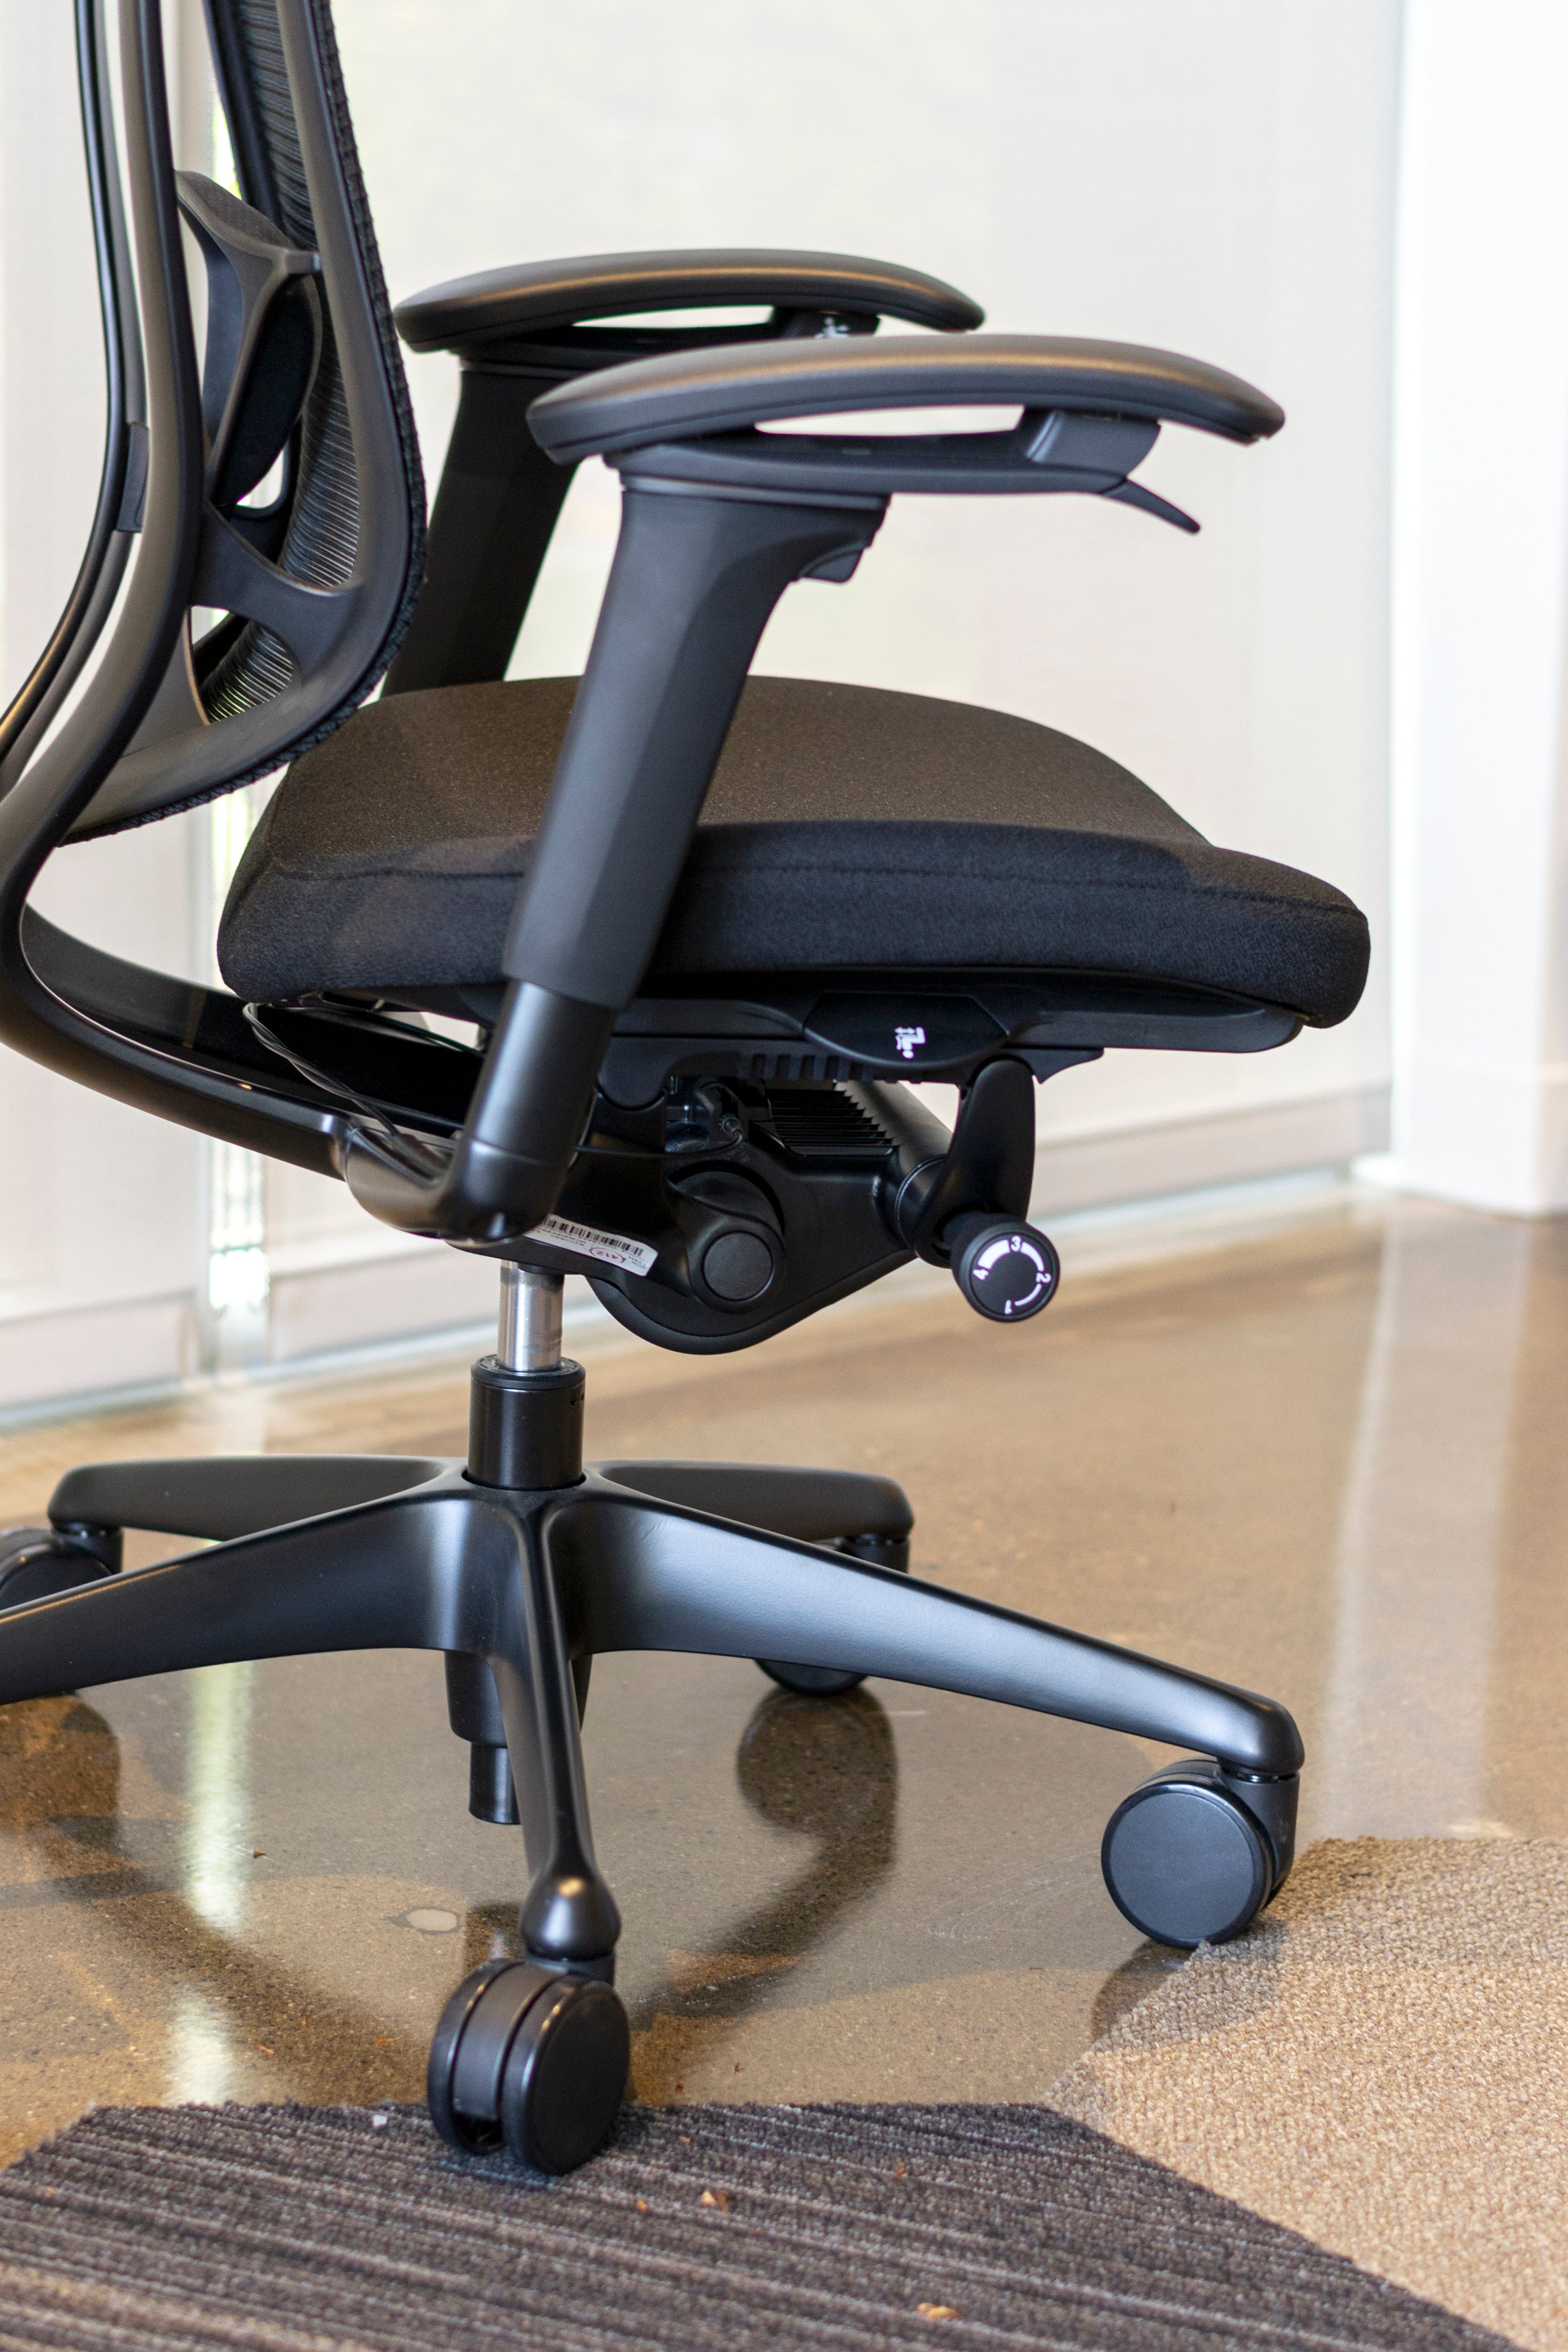 Side view of black Nuova work chair showing multiple adjustment levers located at fingertips.